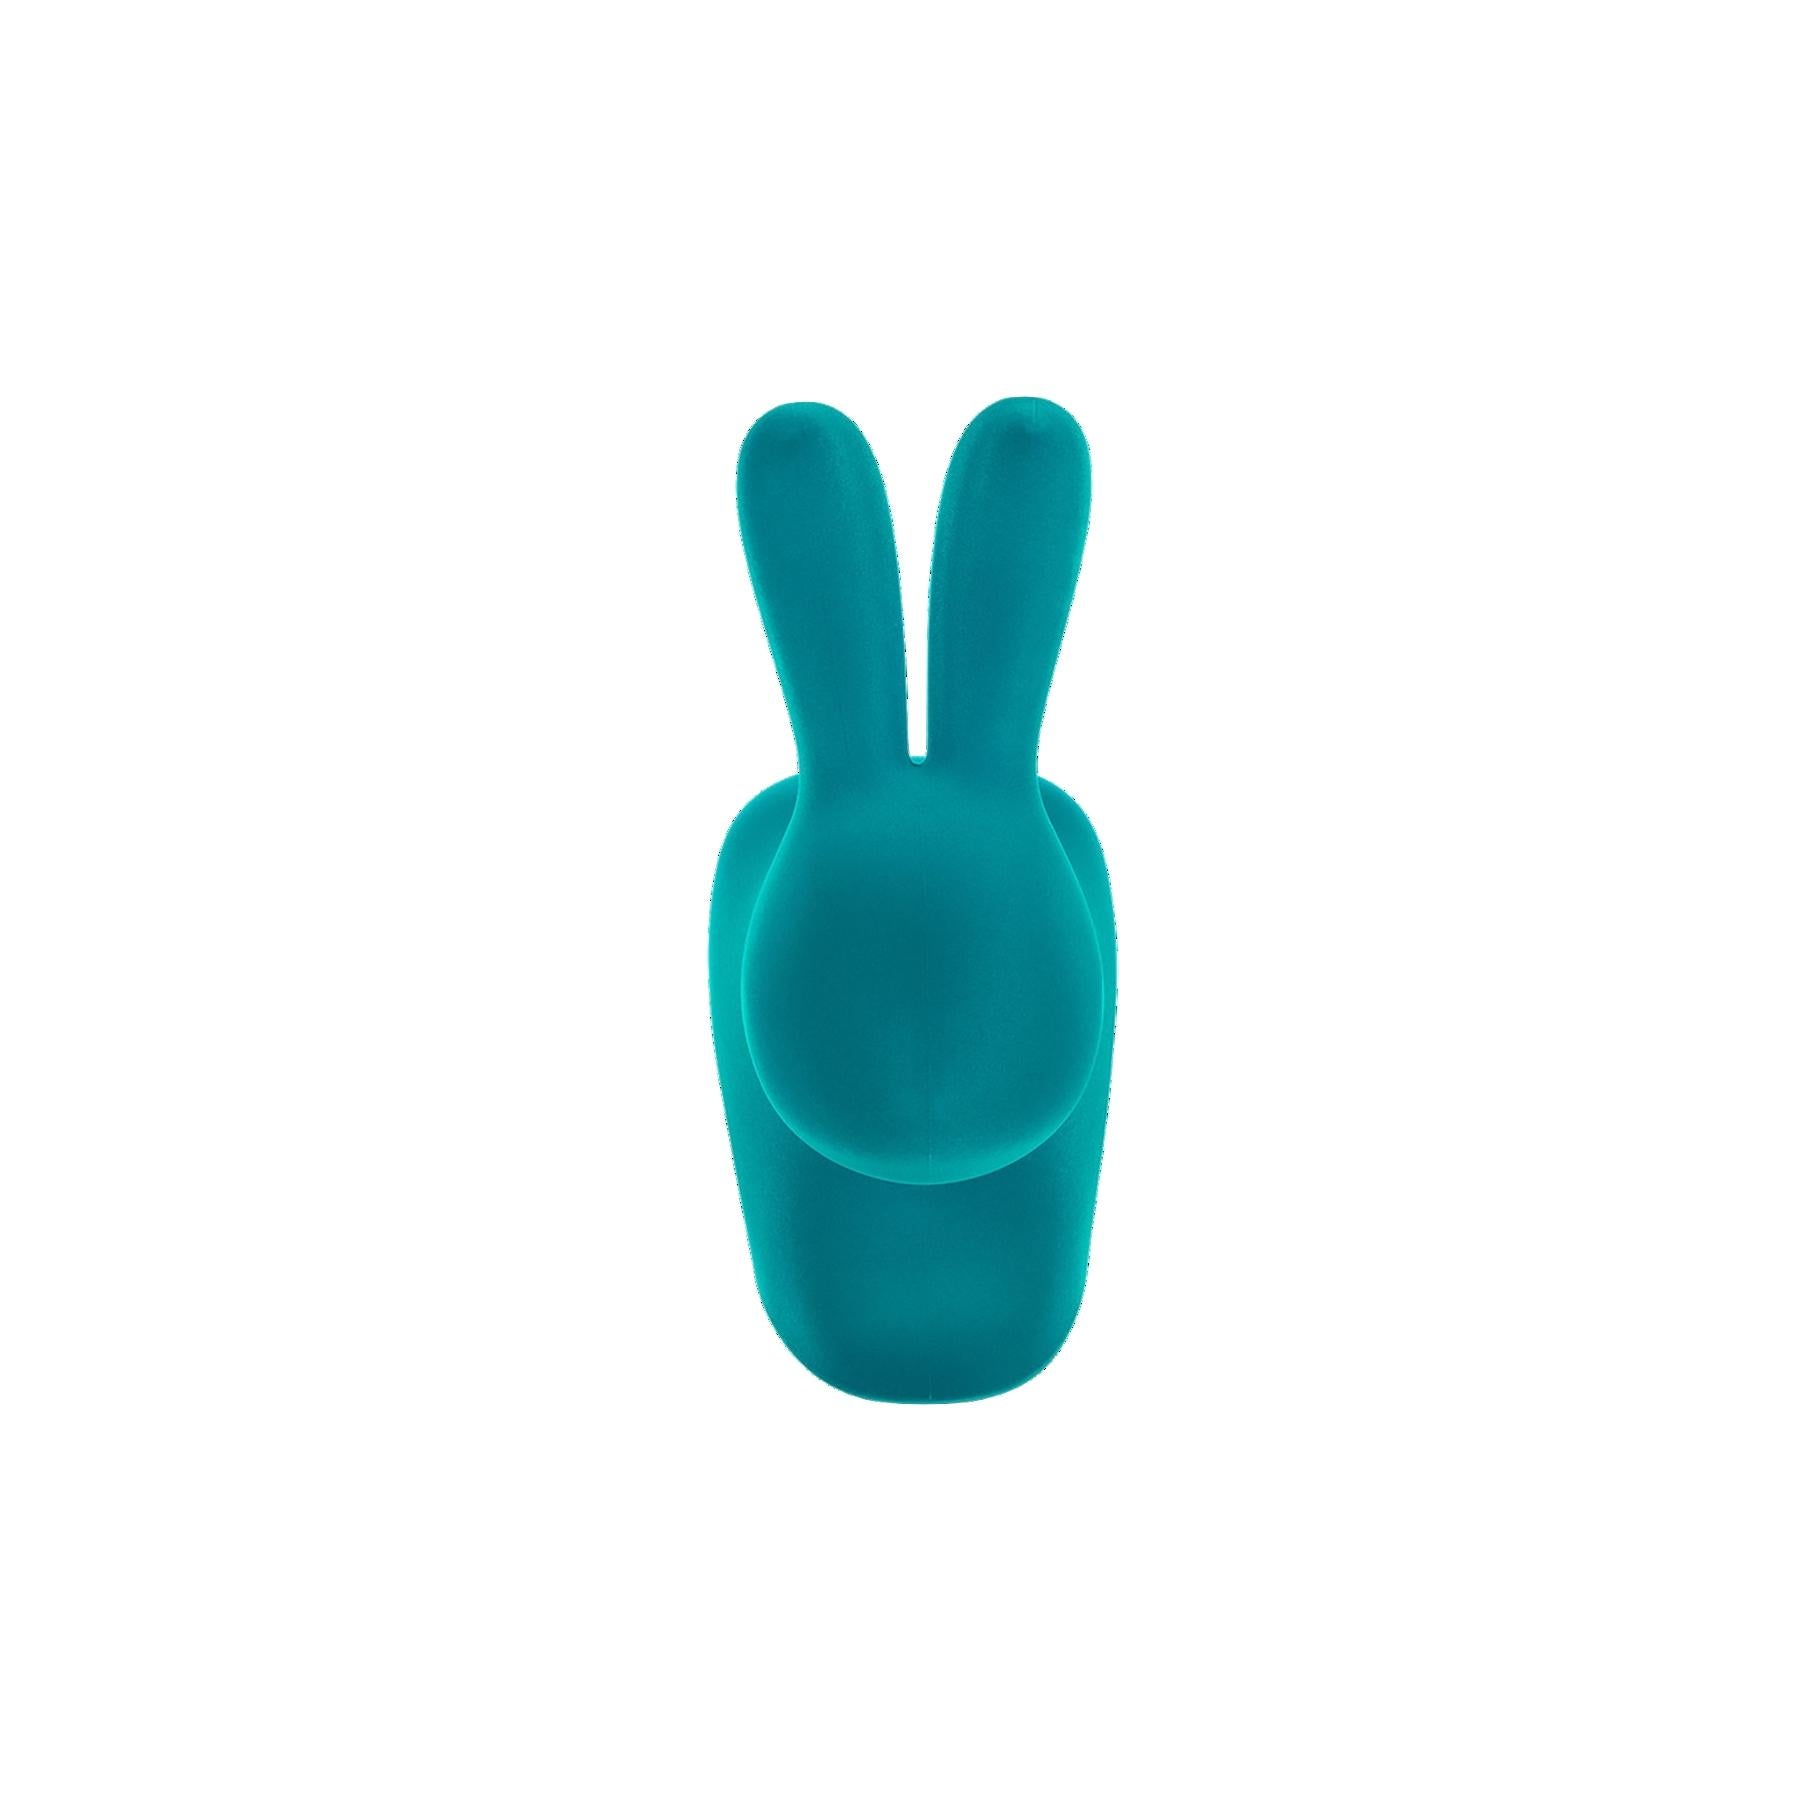 Contemporary In Stock in Los Angeles, Blue / Turquoise Velvet Baby Rabbit Chair